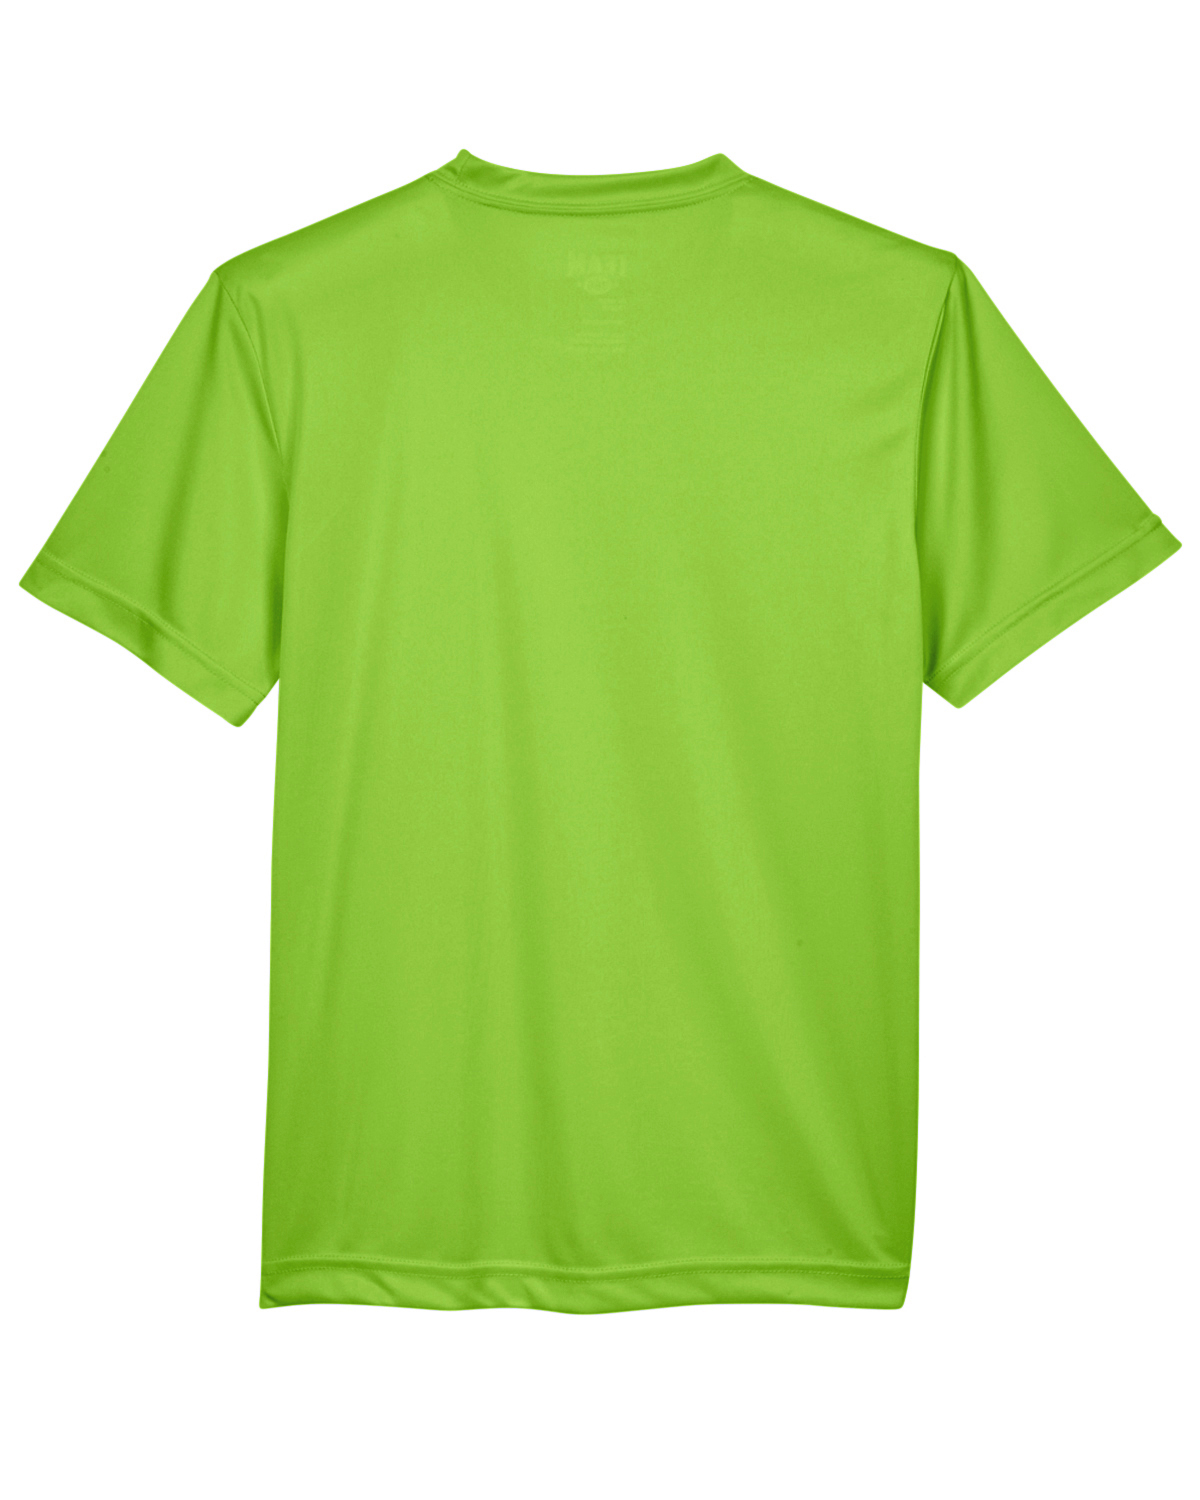 Team™365 Youth - Lime Green